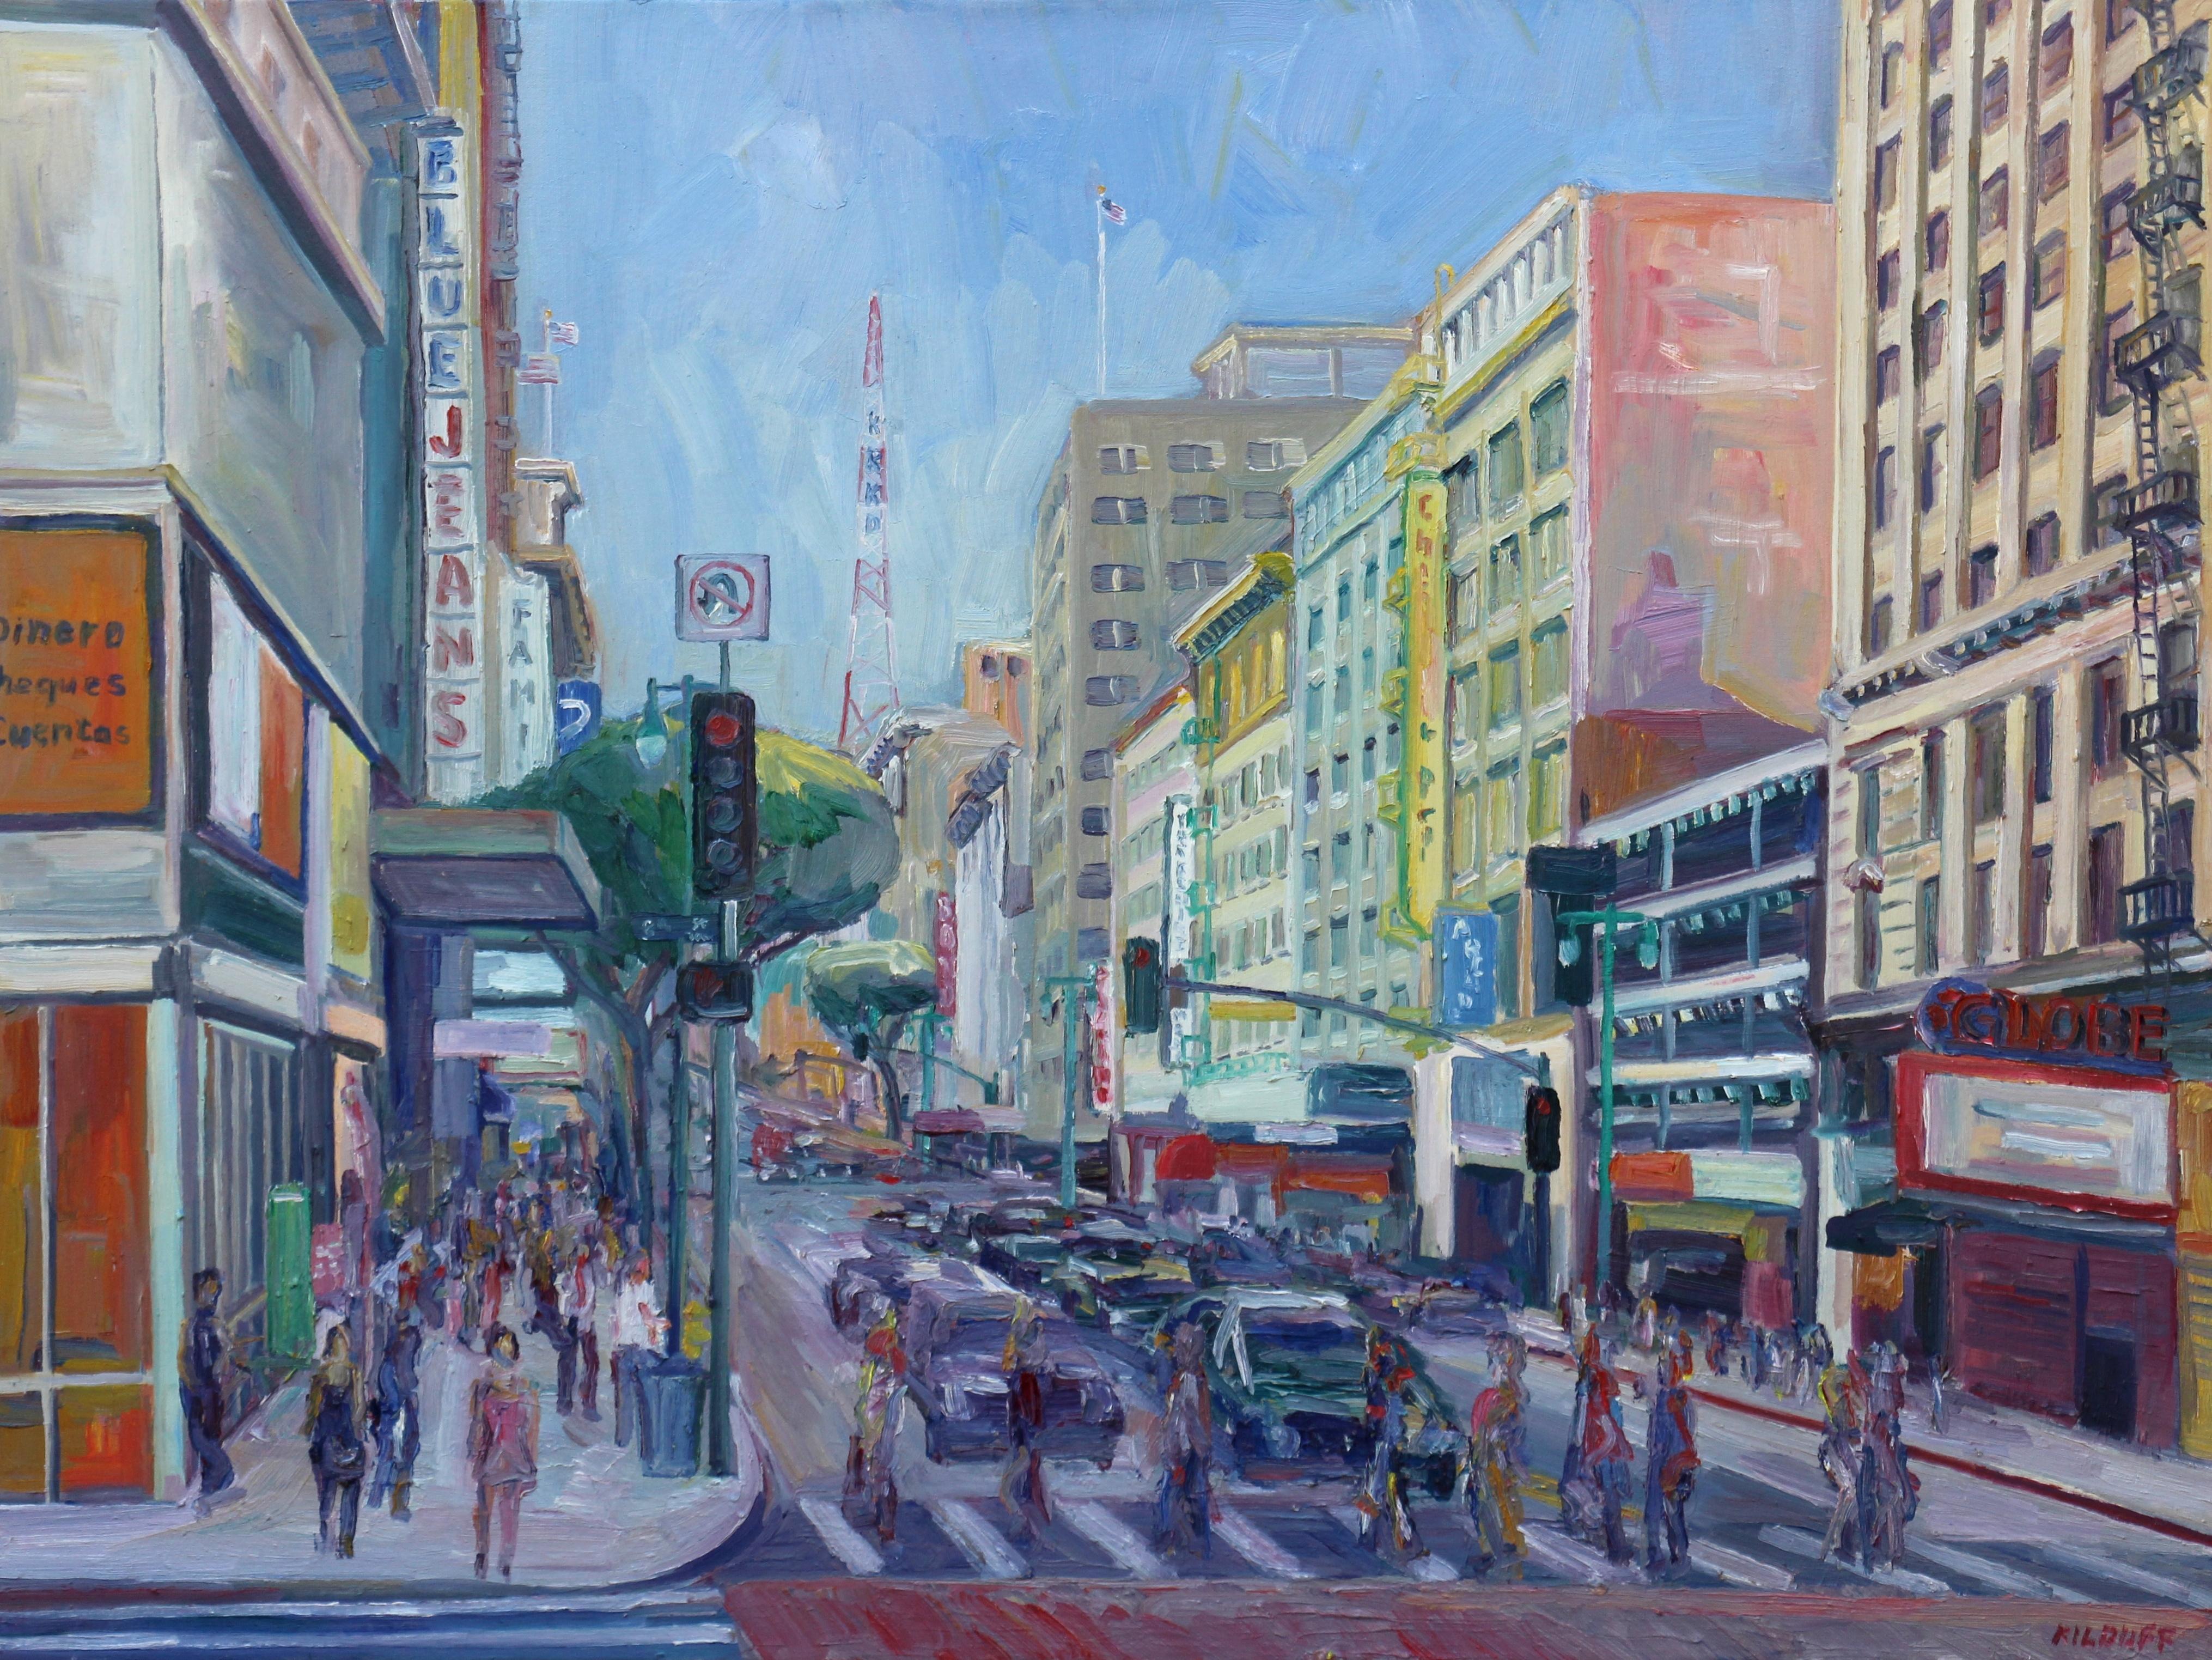 8th & Broadway, Los Angeles, Painting, Oil on Canvas